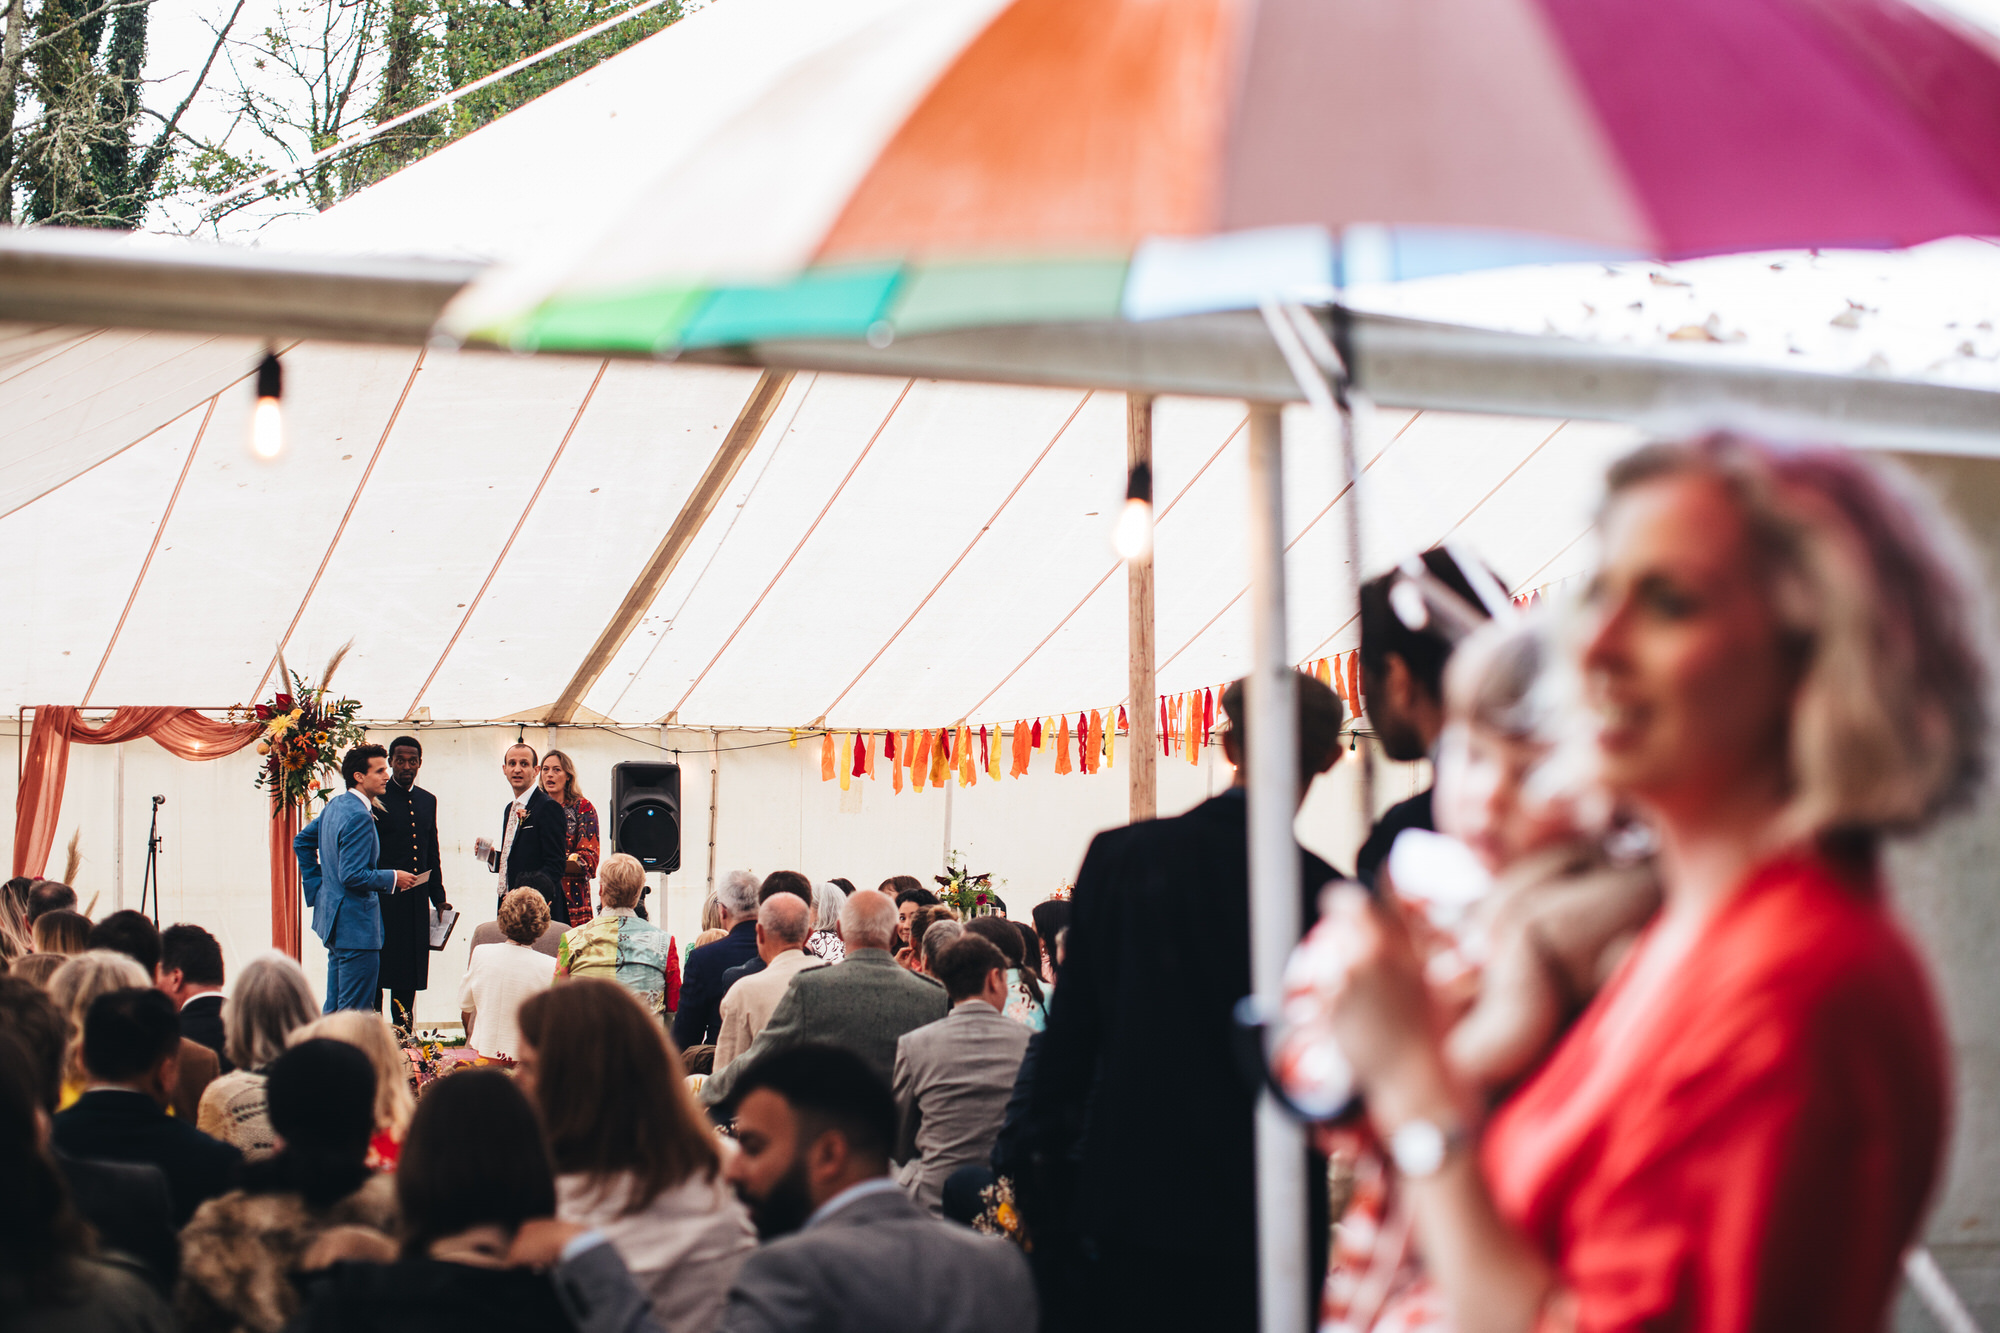 groom waiting by stage inside marquee tent